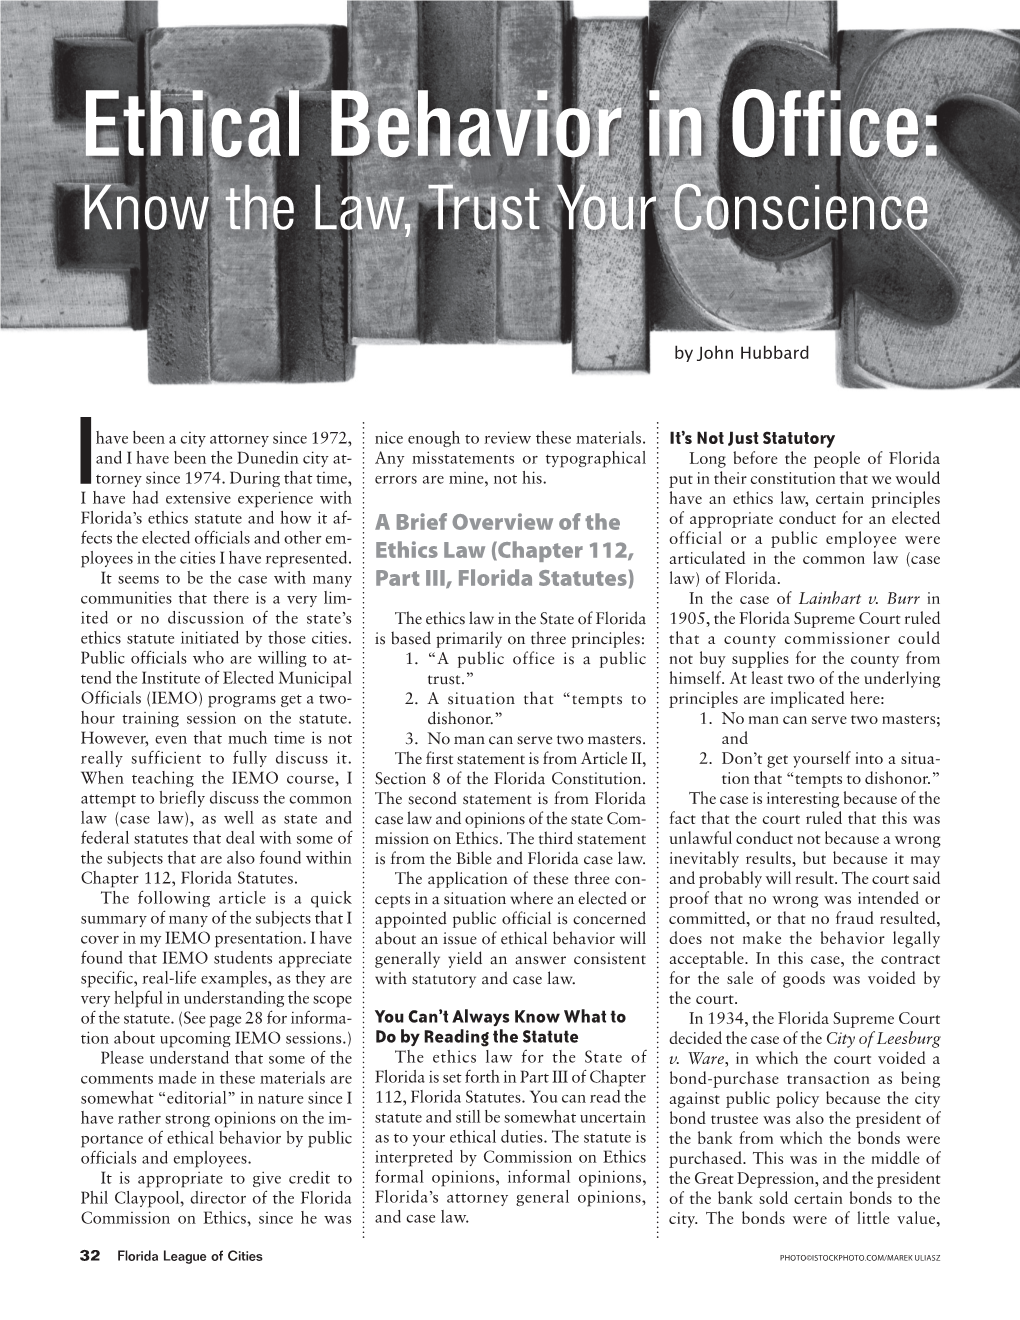 Ethical Behavior in Office: Know the Law, Trust Your Conscience